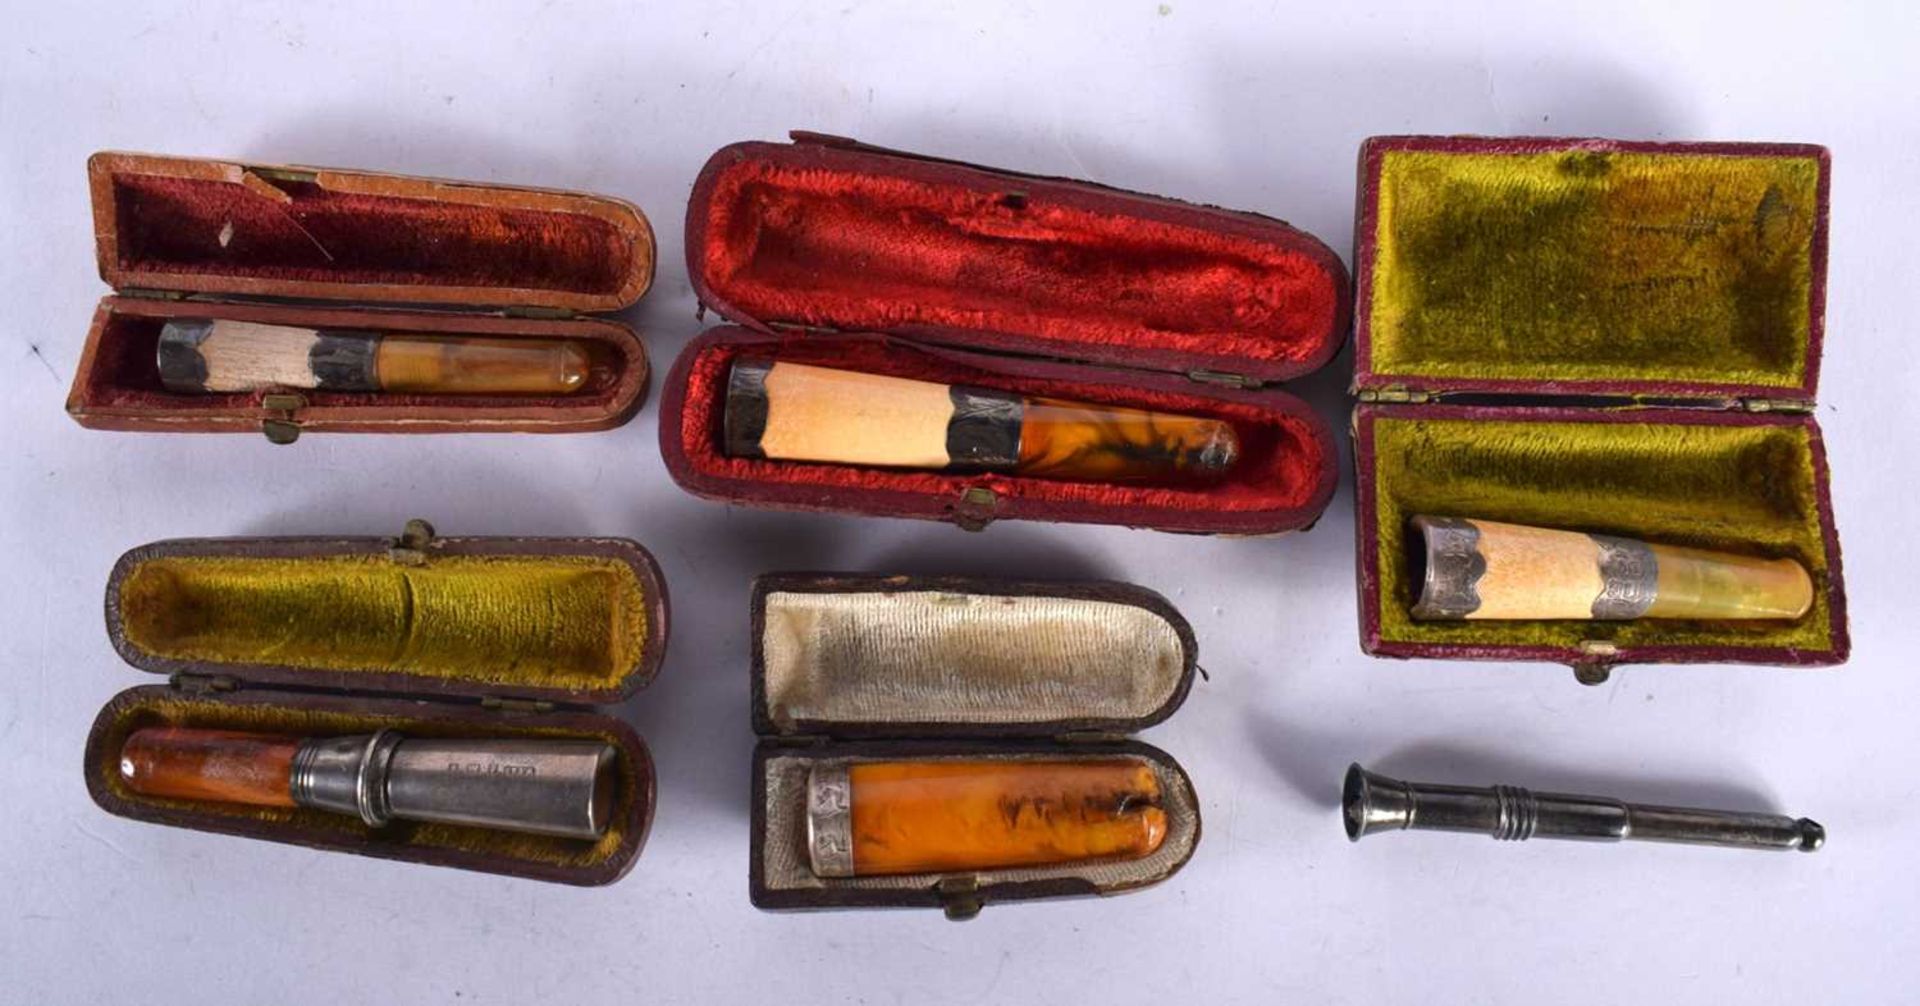 Five Cased Cheroot Holders with Amber Tips and Silver Mounts together with a Silver Cigar Punch (6).